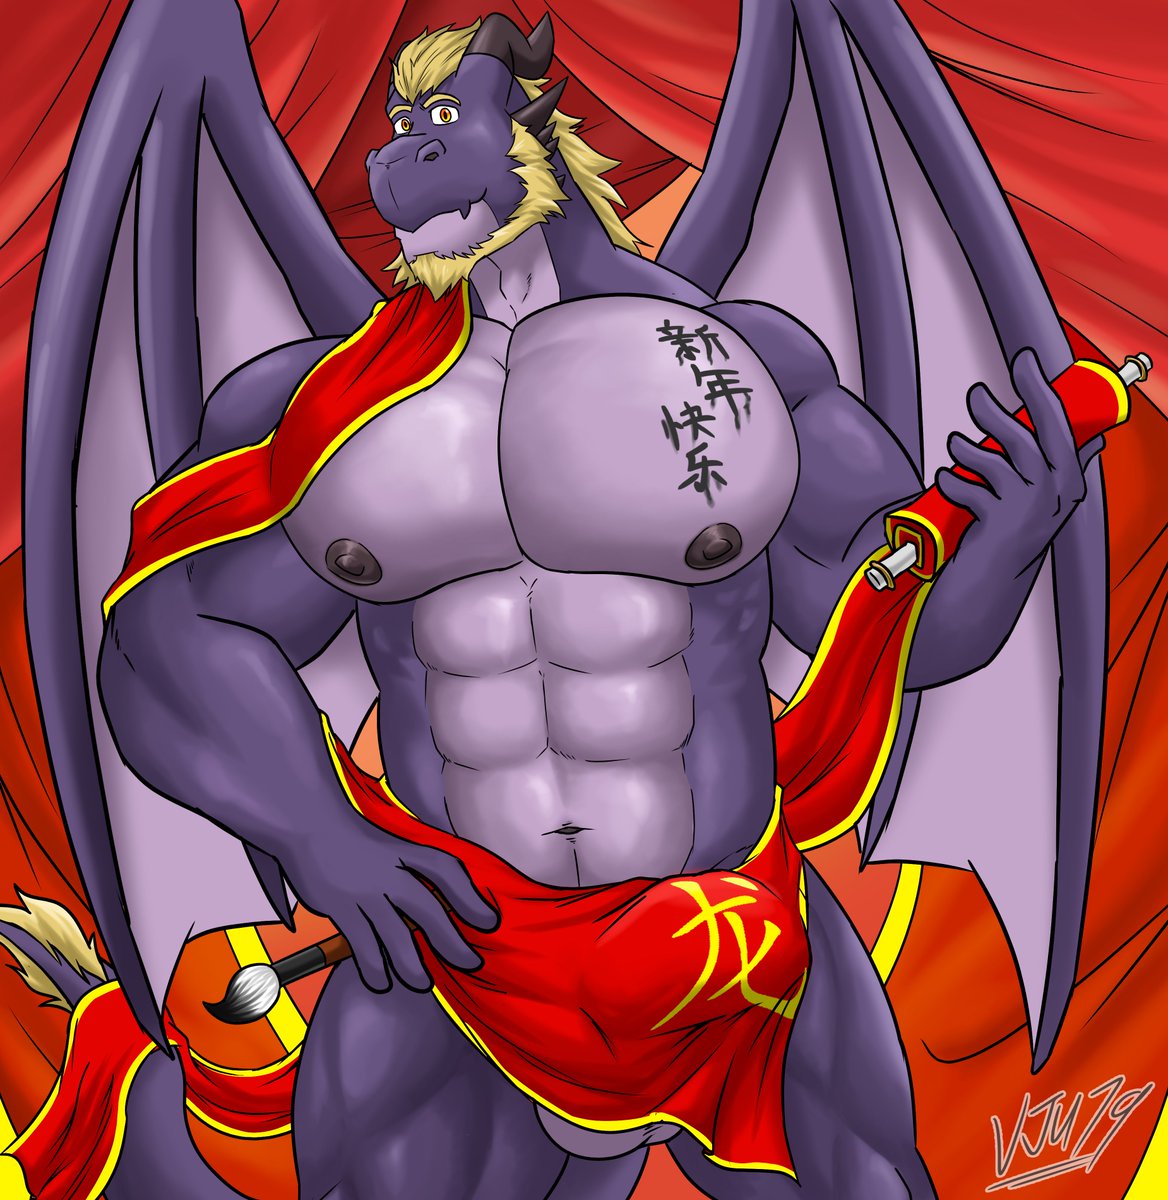 It's the year of the dragon! So naturally I'm drawing this hunky derg for the occasion.